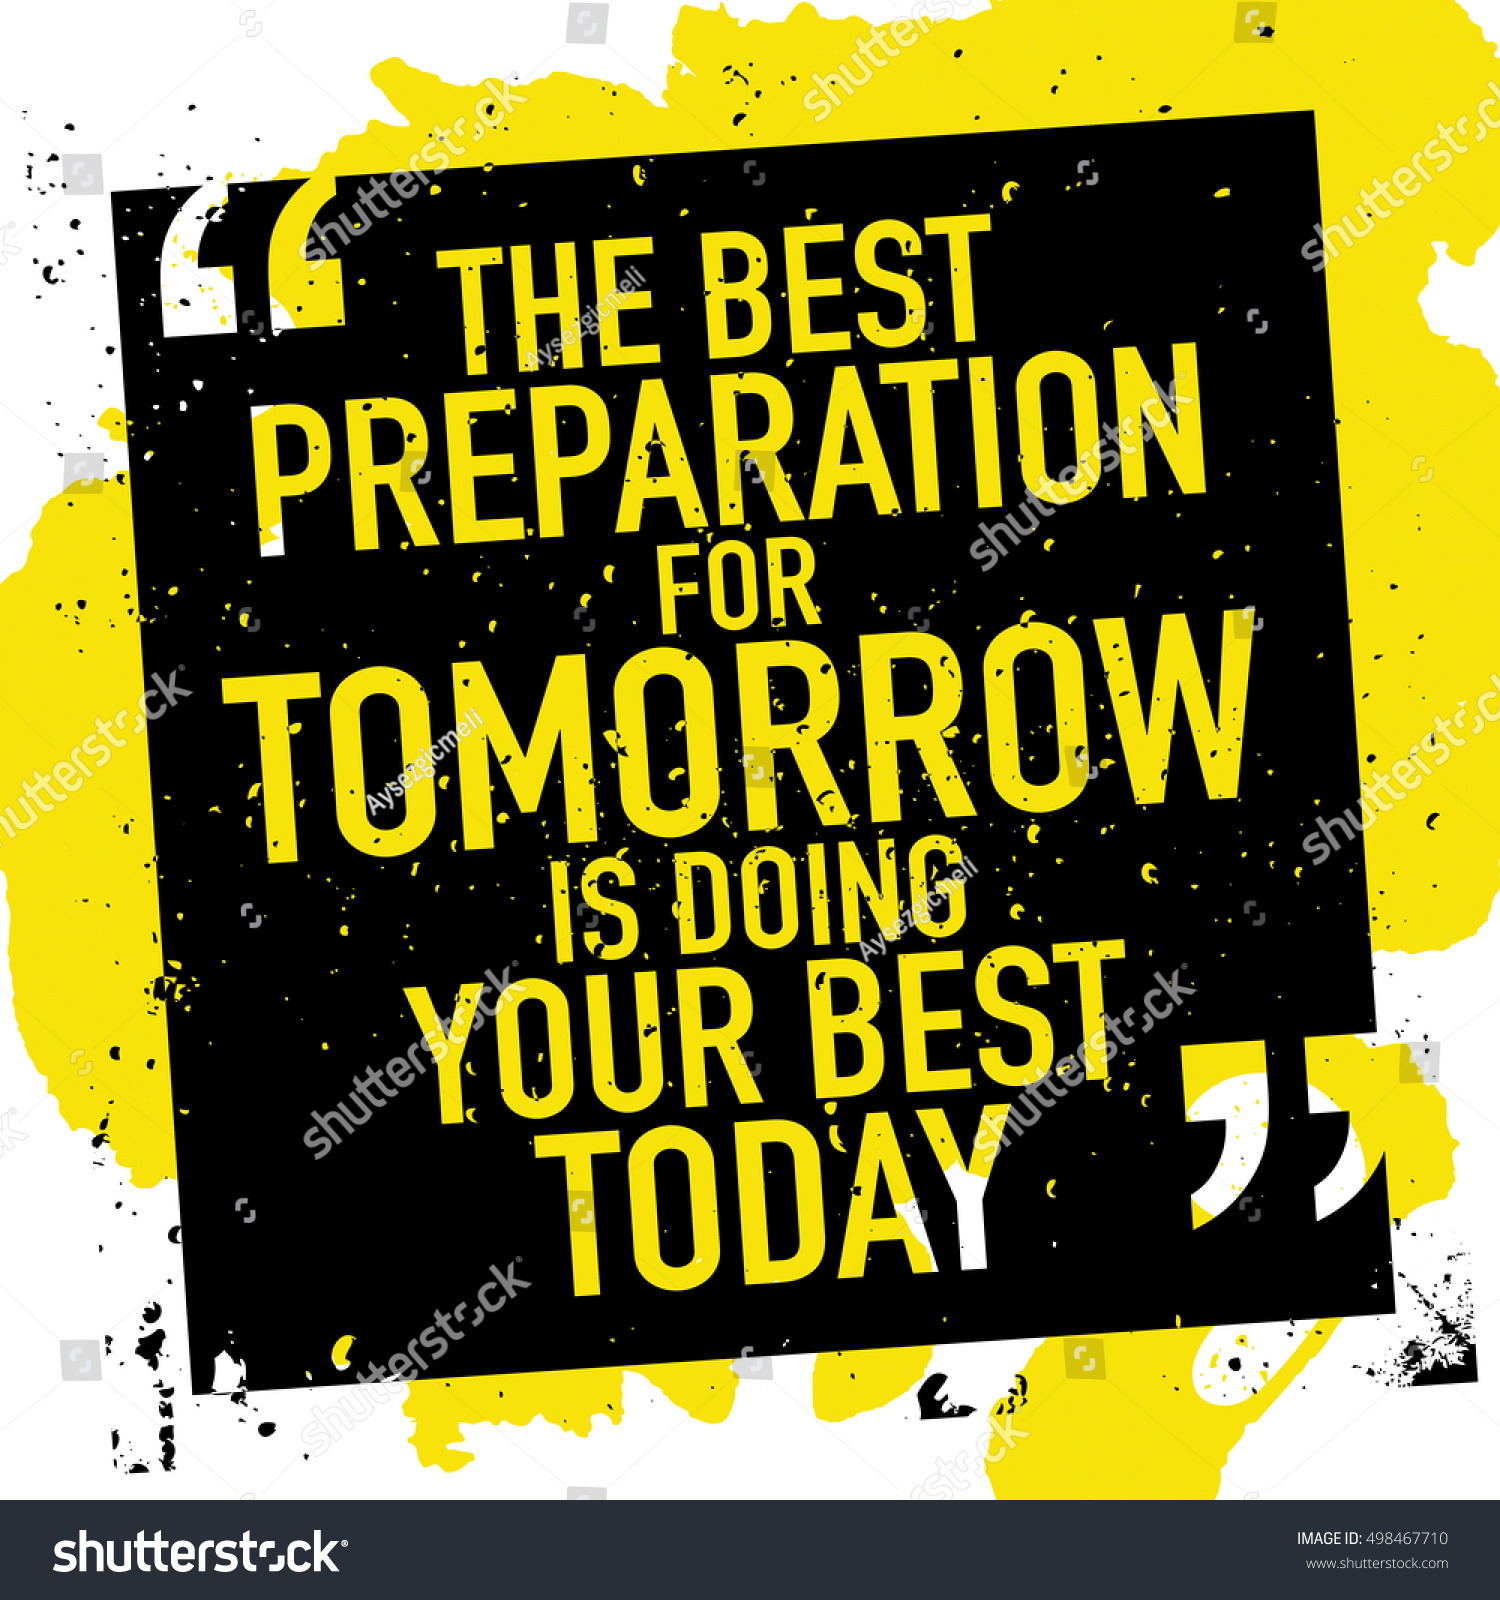 DIYthinker Quote The Best Preparation is Doing Your Best Today Desktop Photo Frame Picture Art Decoration Painting 6x8 inch 